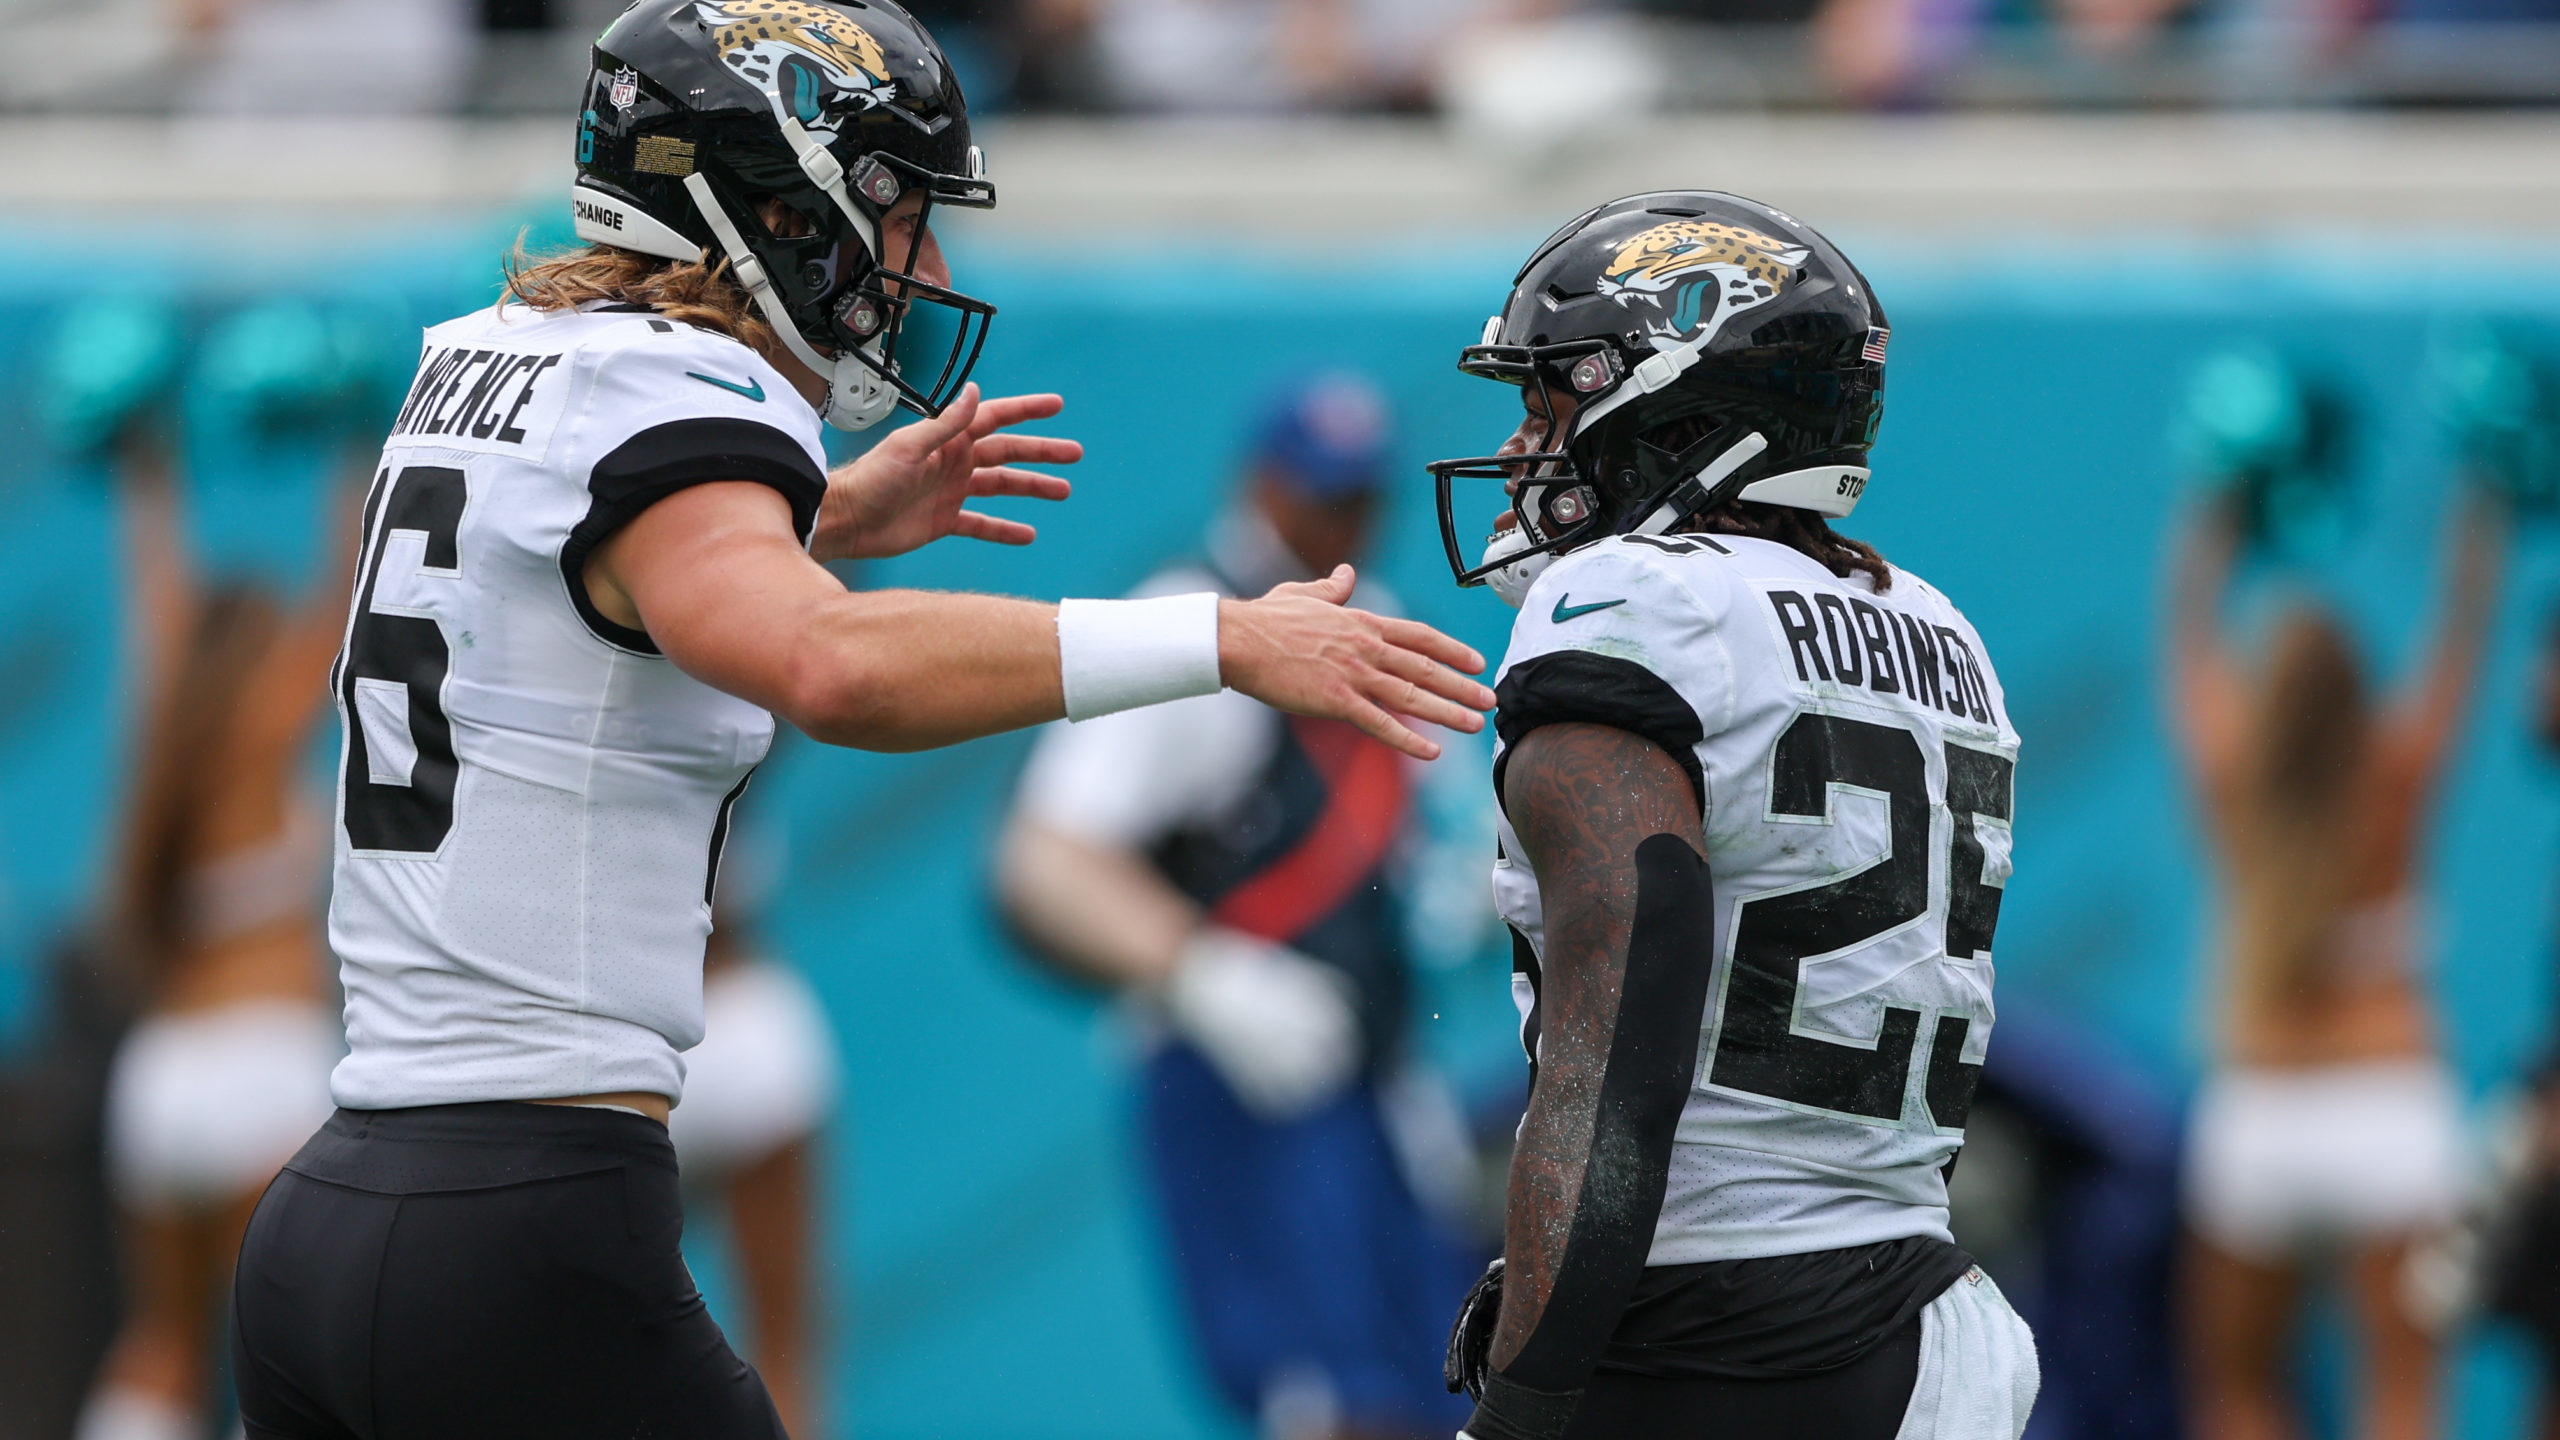 After Chargers Blowout, It’s Time to Give Jaguars Their Due